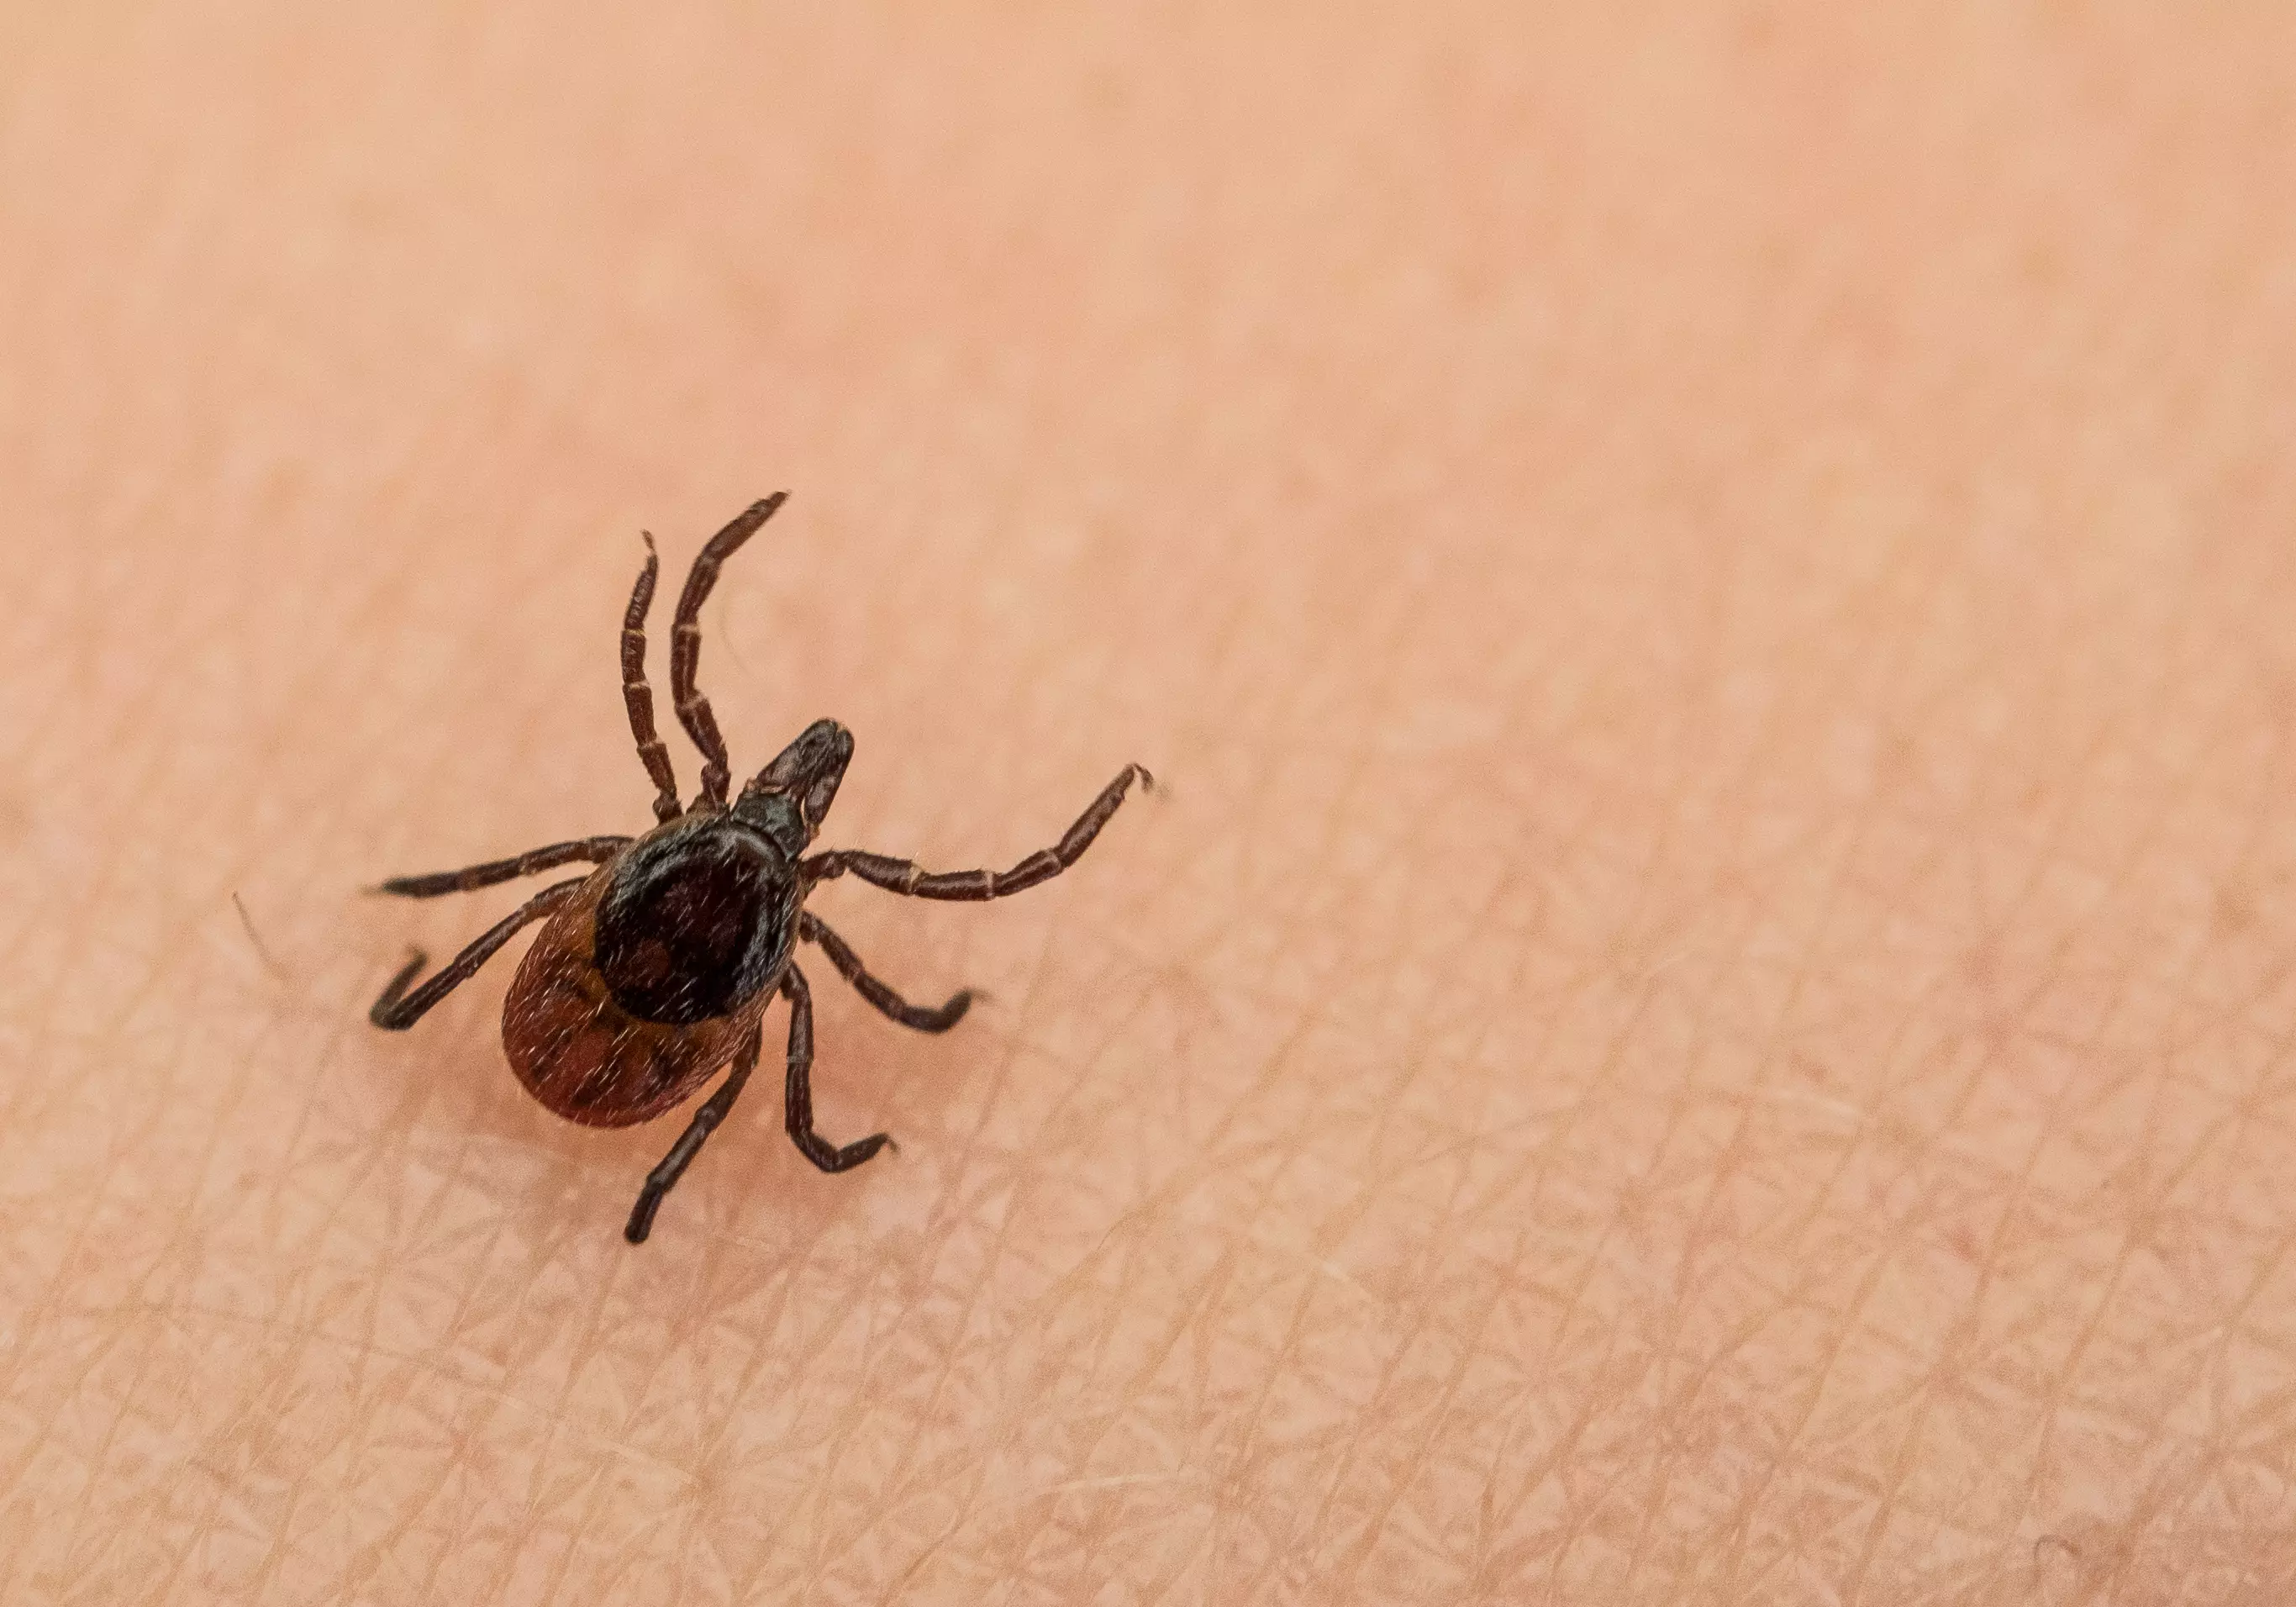 Tick-borne encephalitis virus has been found in the UK for the first time.